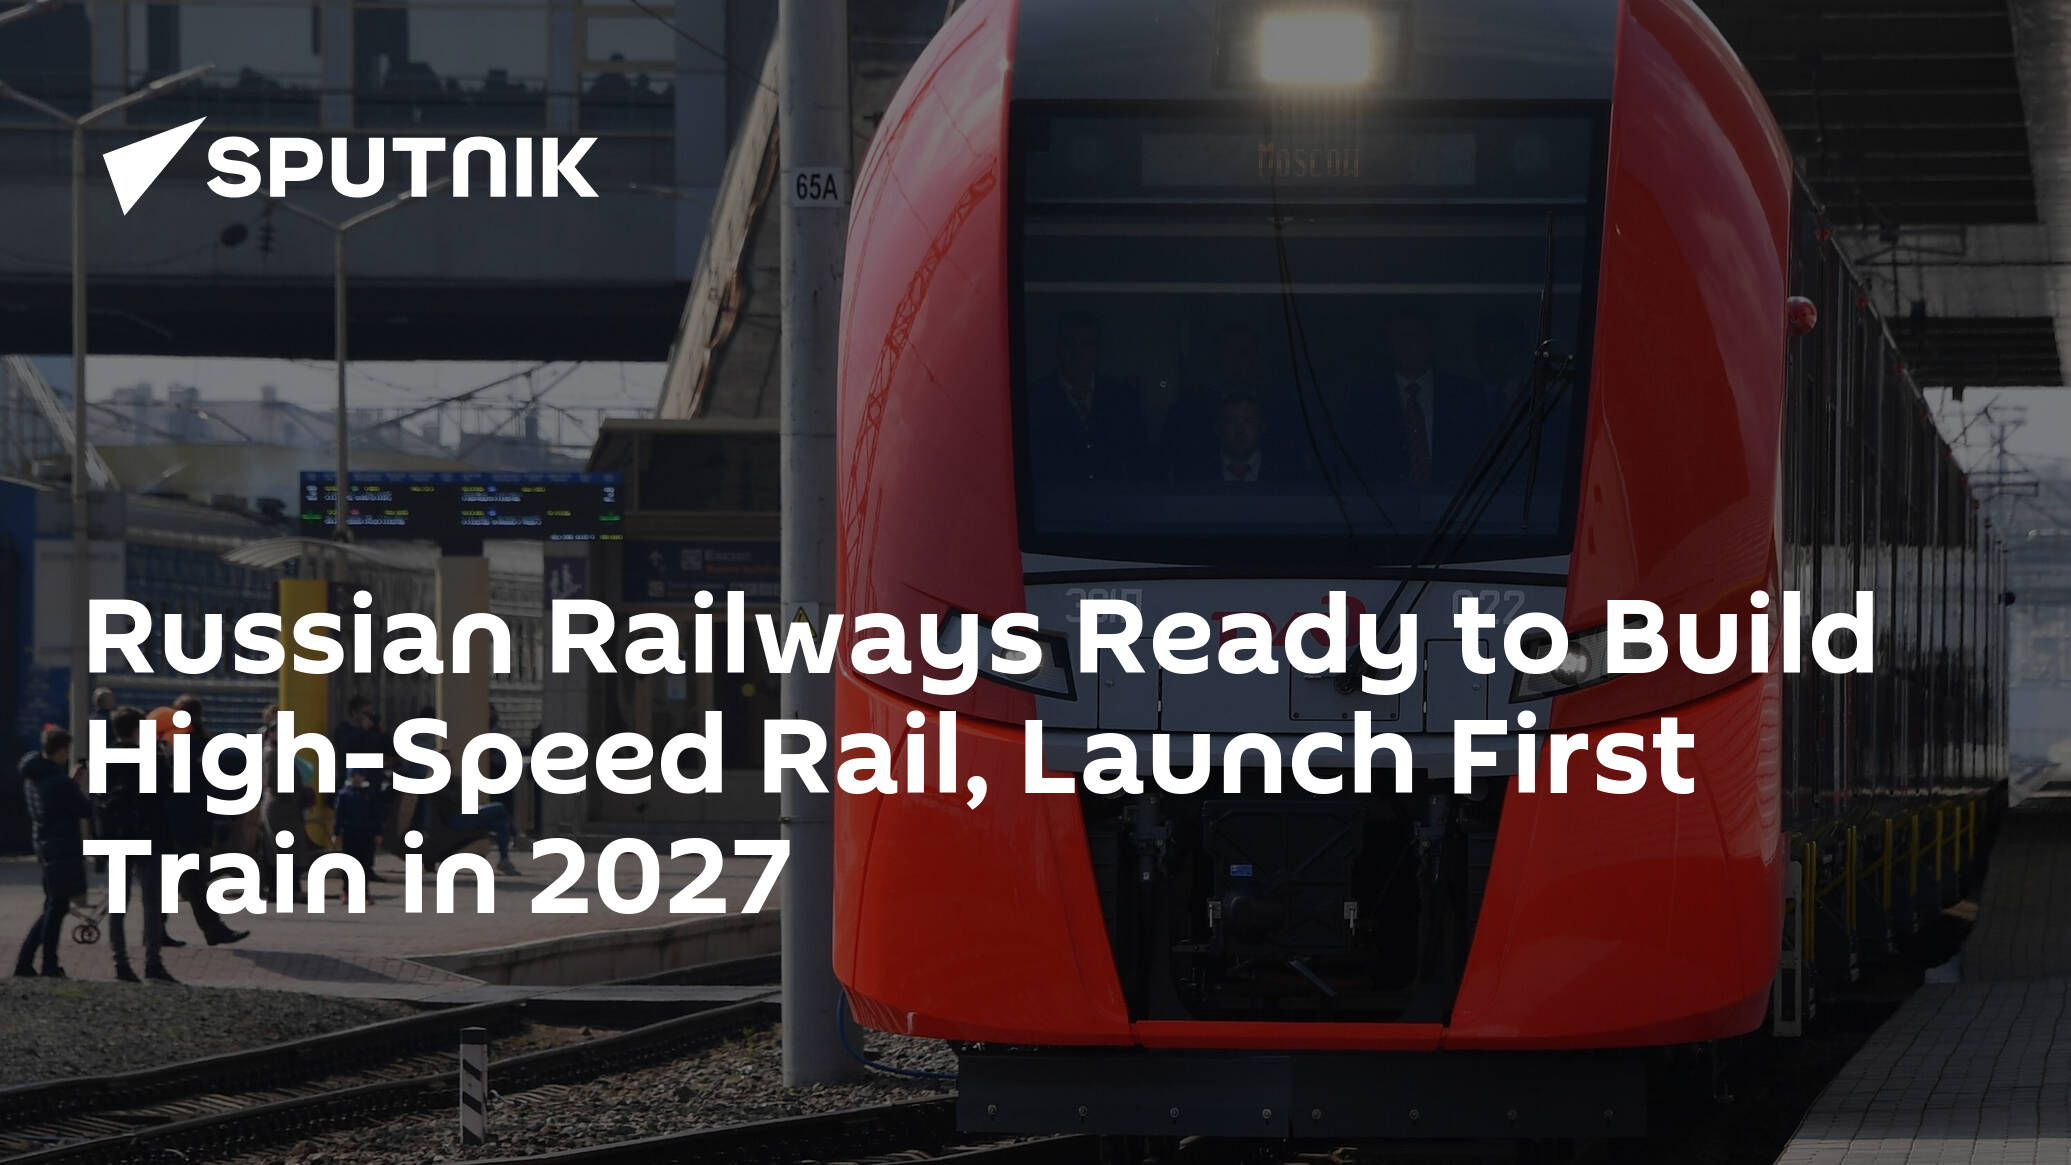 Russian Railways Ready to Build High-Speed Rail, Launch First Train in 2027